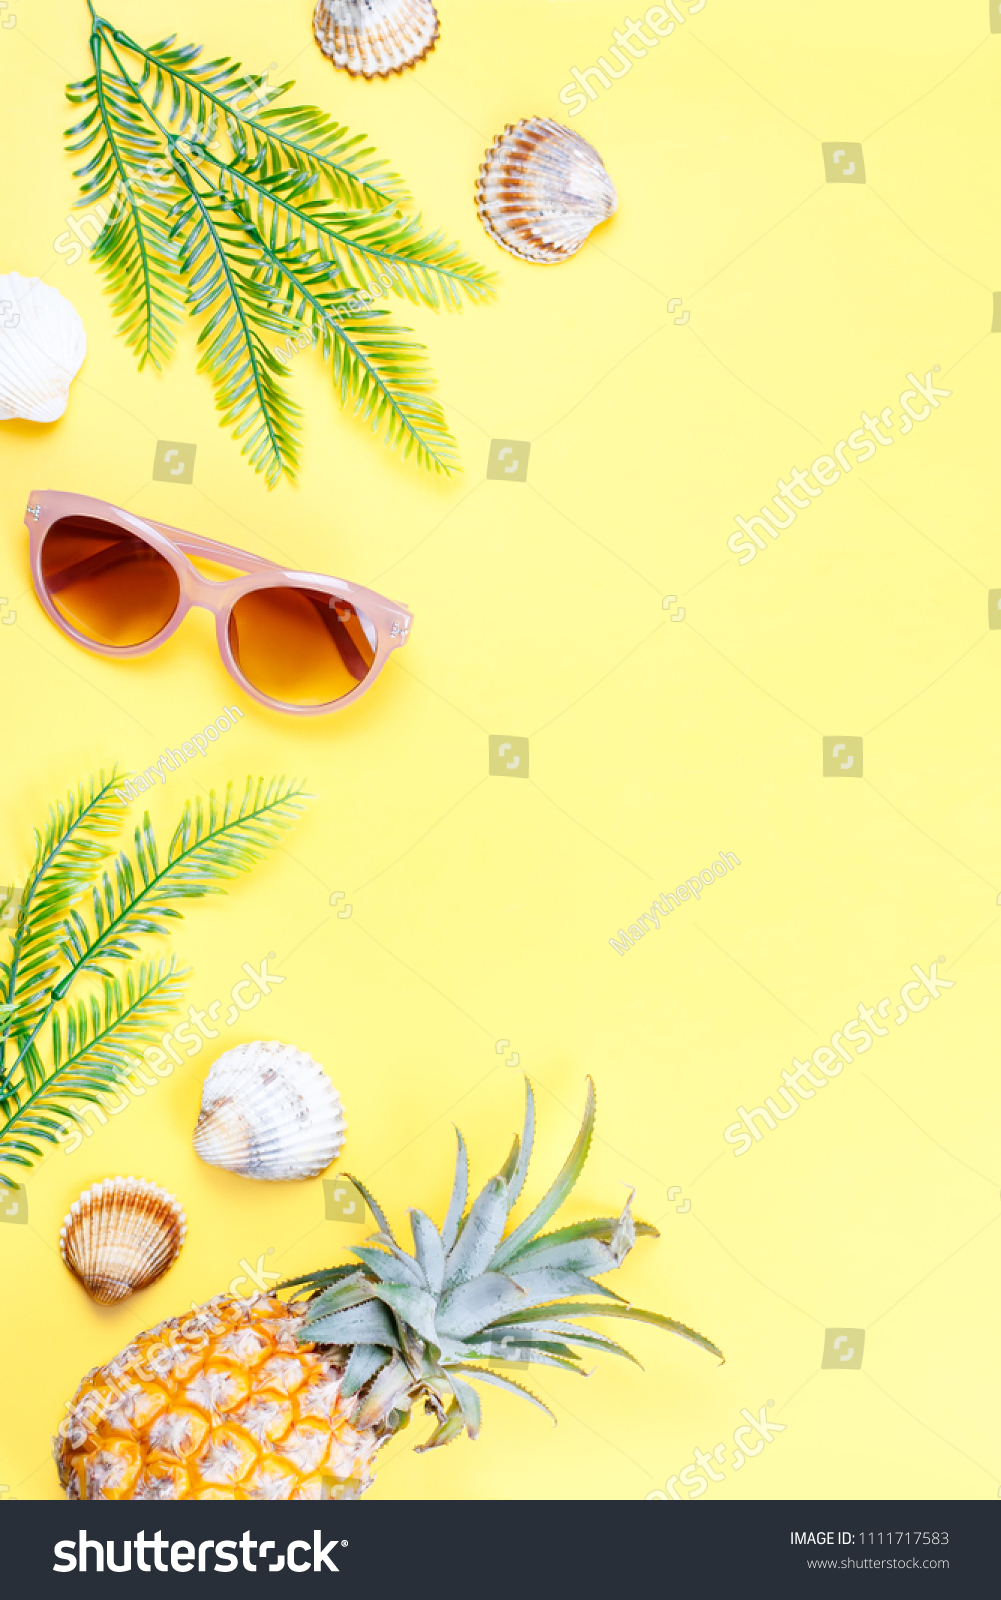 Tropical summer concept with woman fashion accessories, leaves and pineapple on yellow background. Flat lay, top view #1111717583